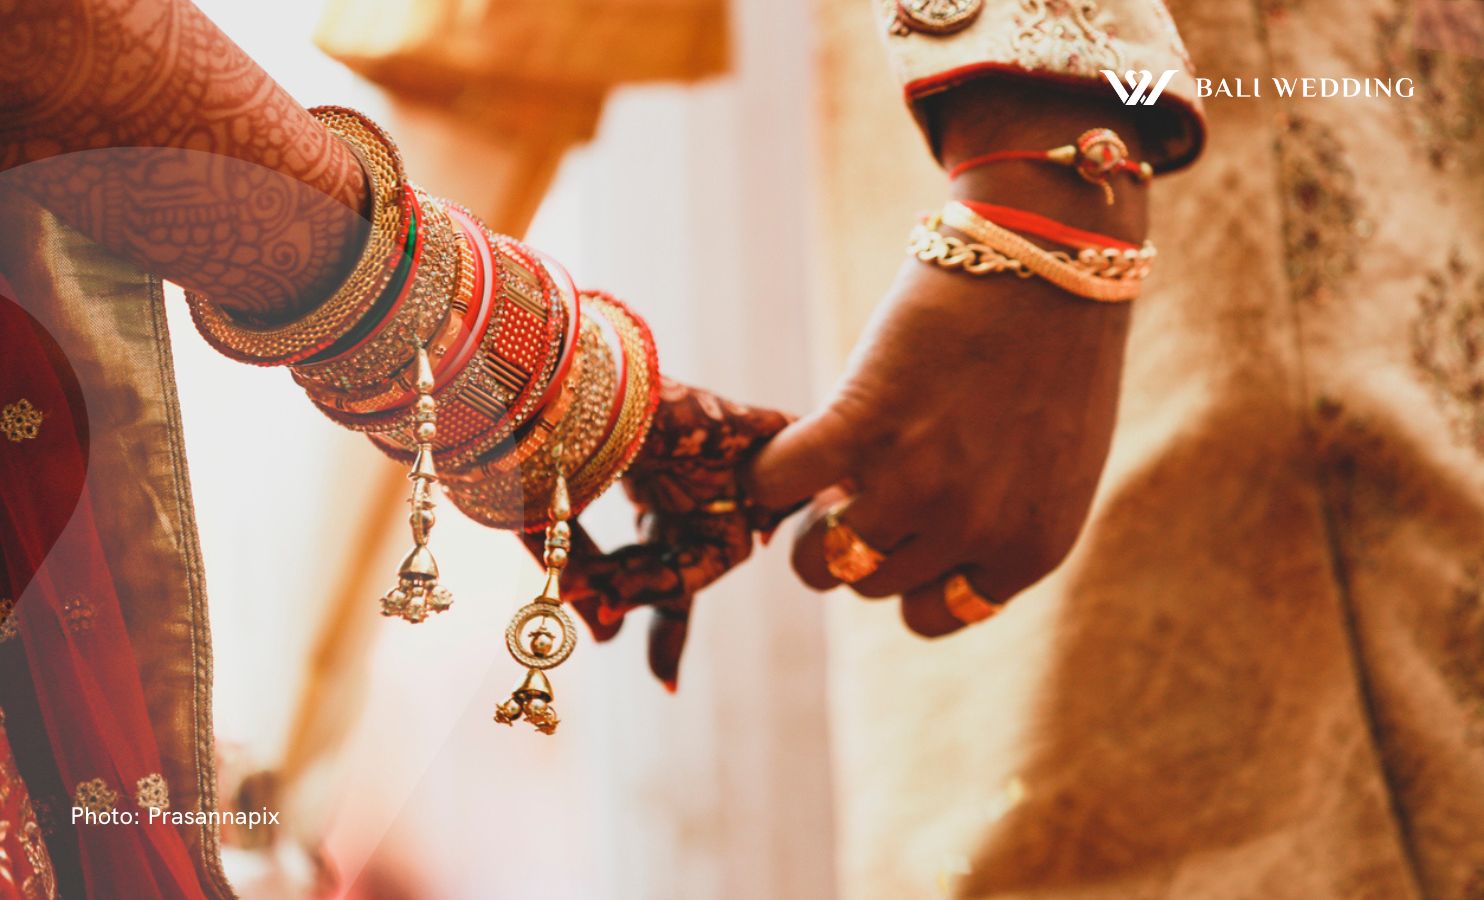 how to shoot indian wedding photo